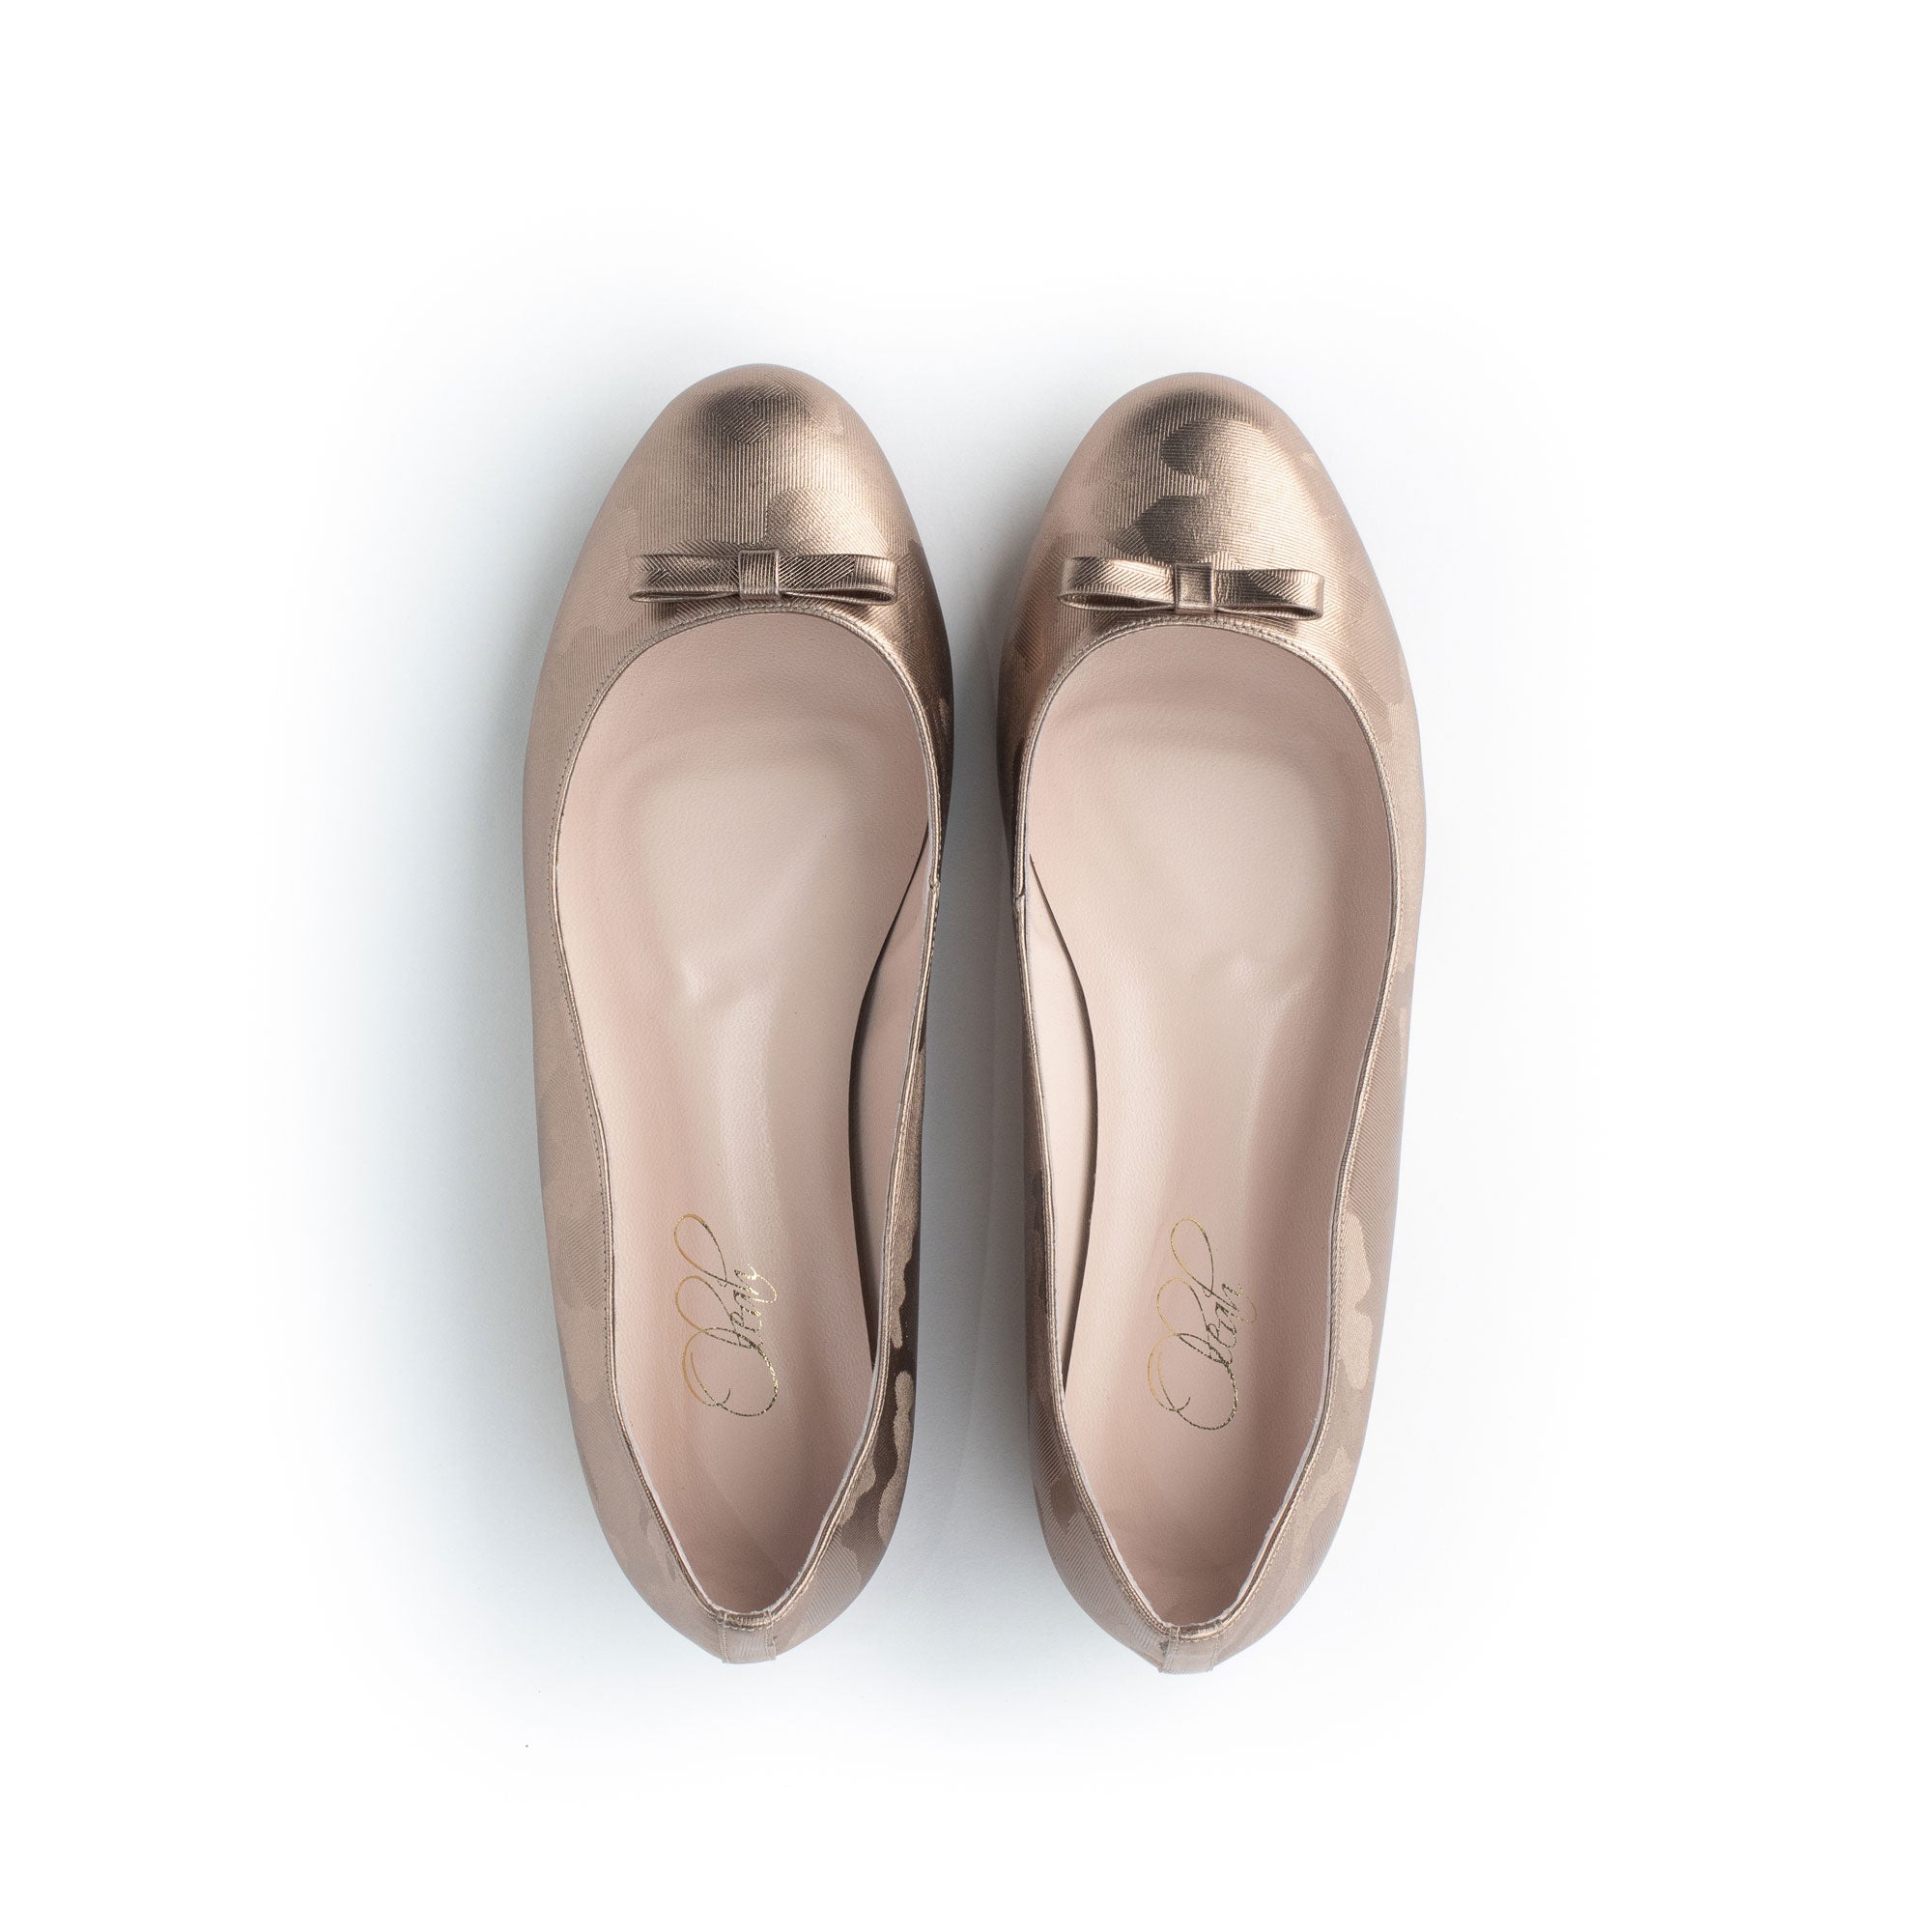 Oleah Classic Ballerina - Rose Gold factory outlet